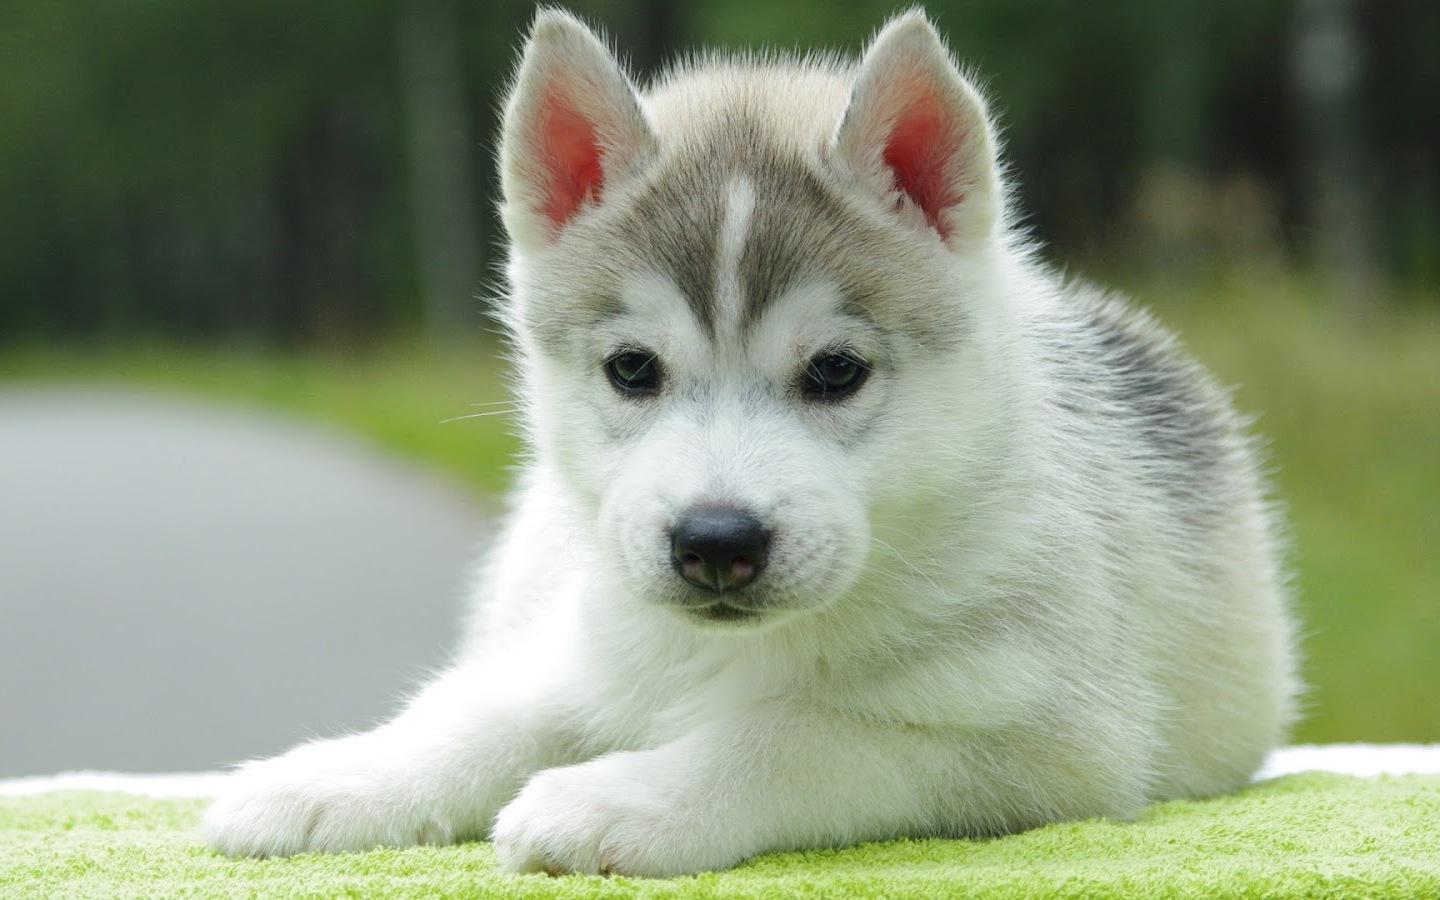 Cute Puppy Pictures for Wallpaper Download Free